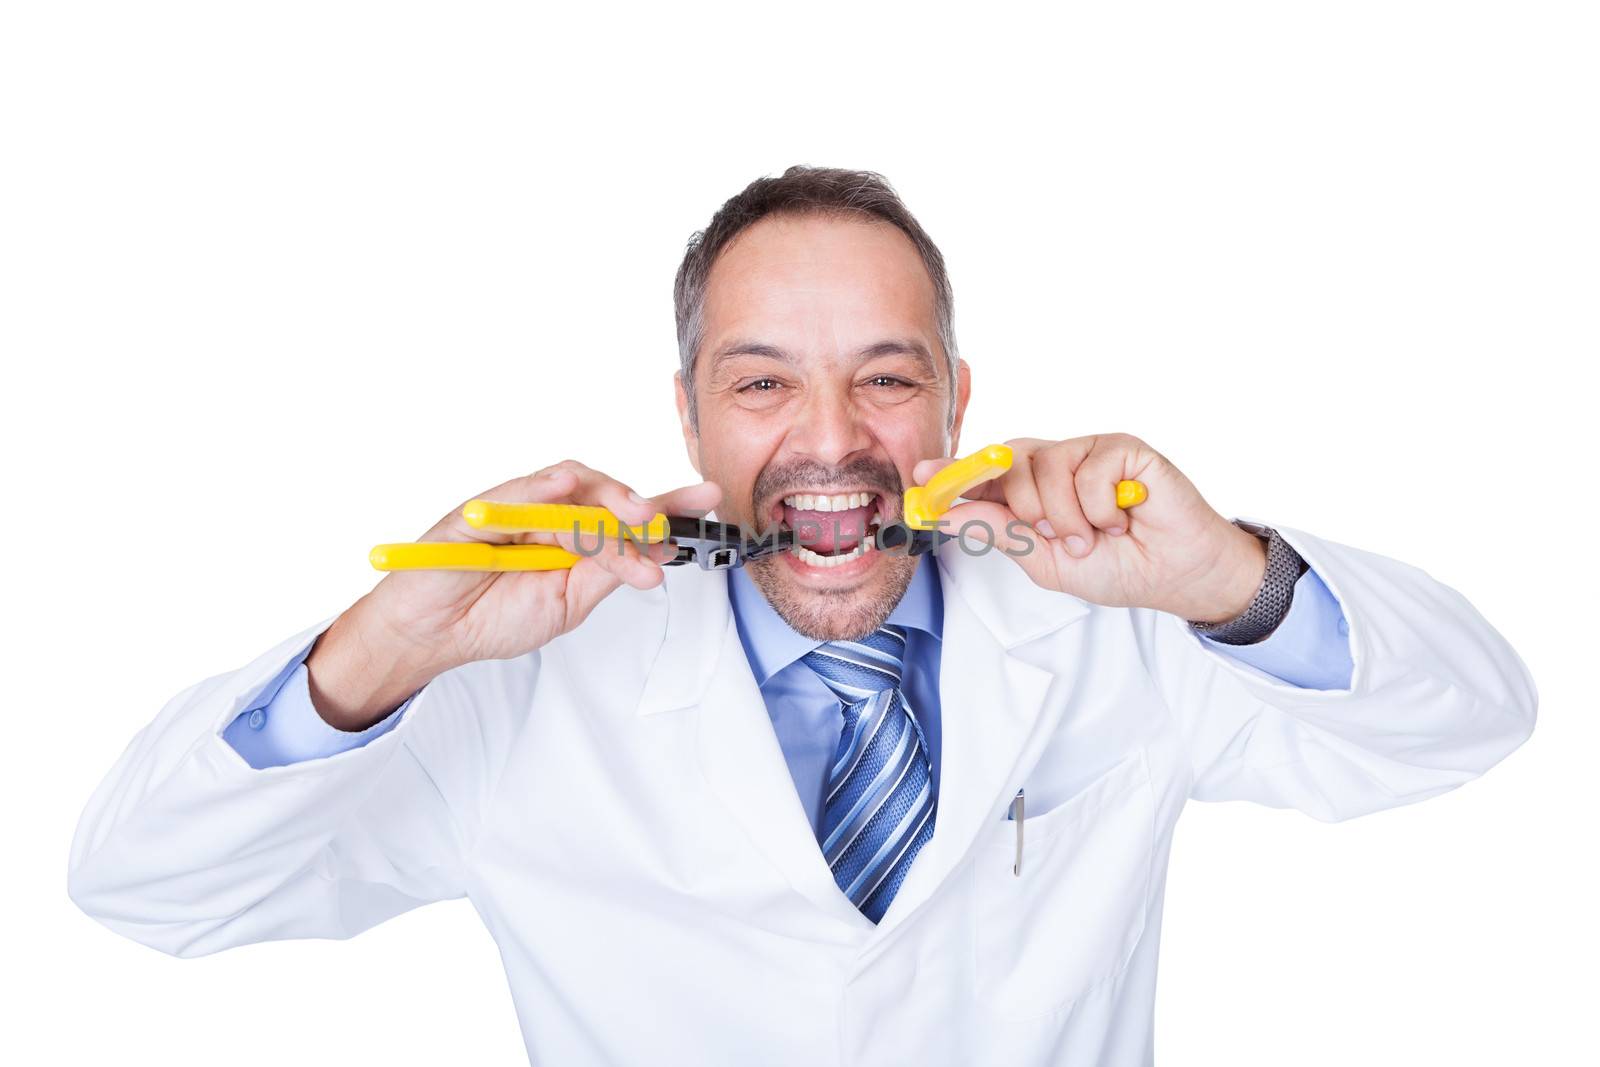 Smiling Male Doctor Holding Pliers by AndreyPopov